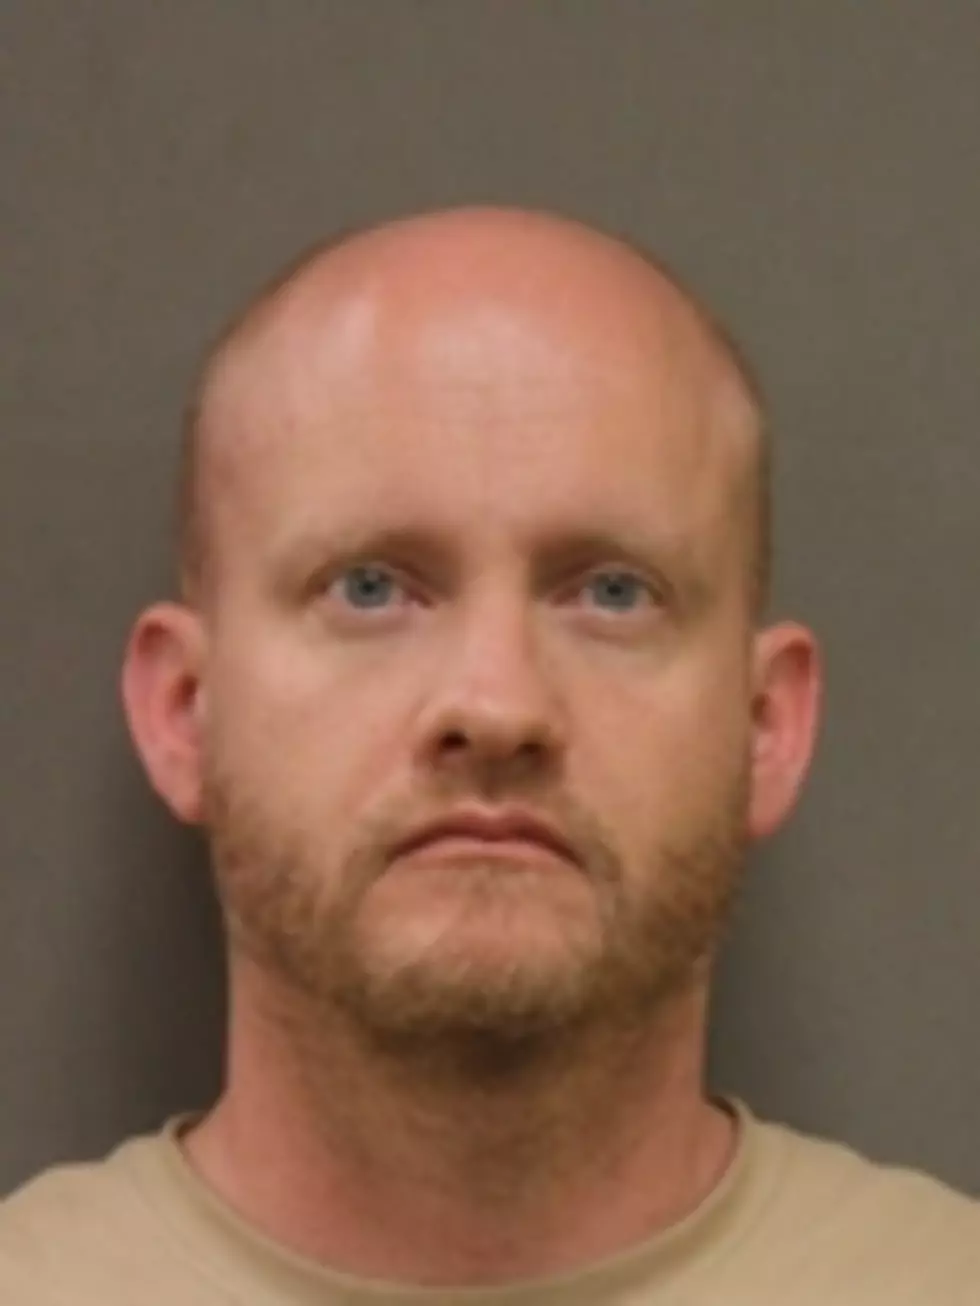 Warrensburg School District IT Director Charged With Rape